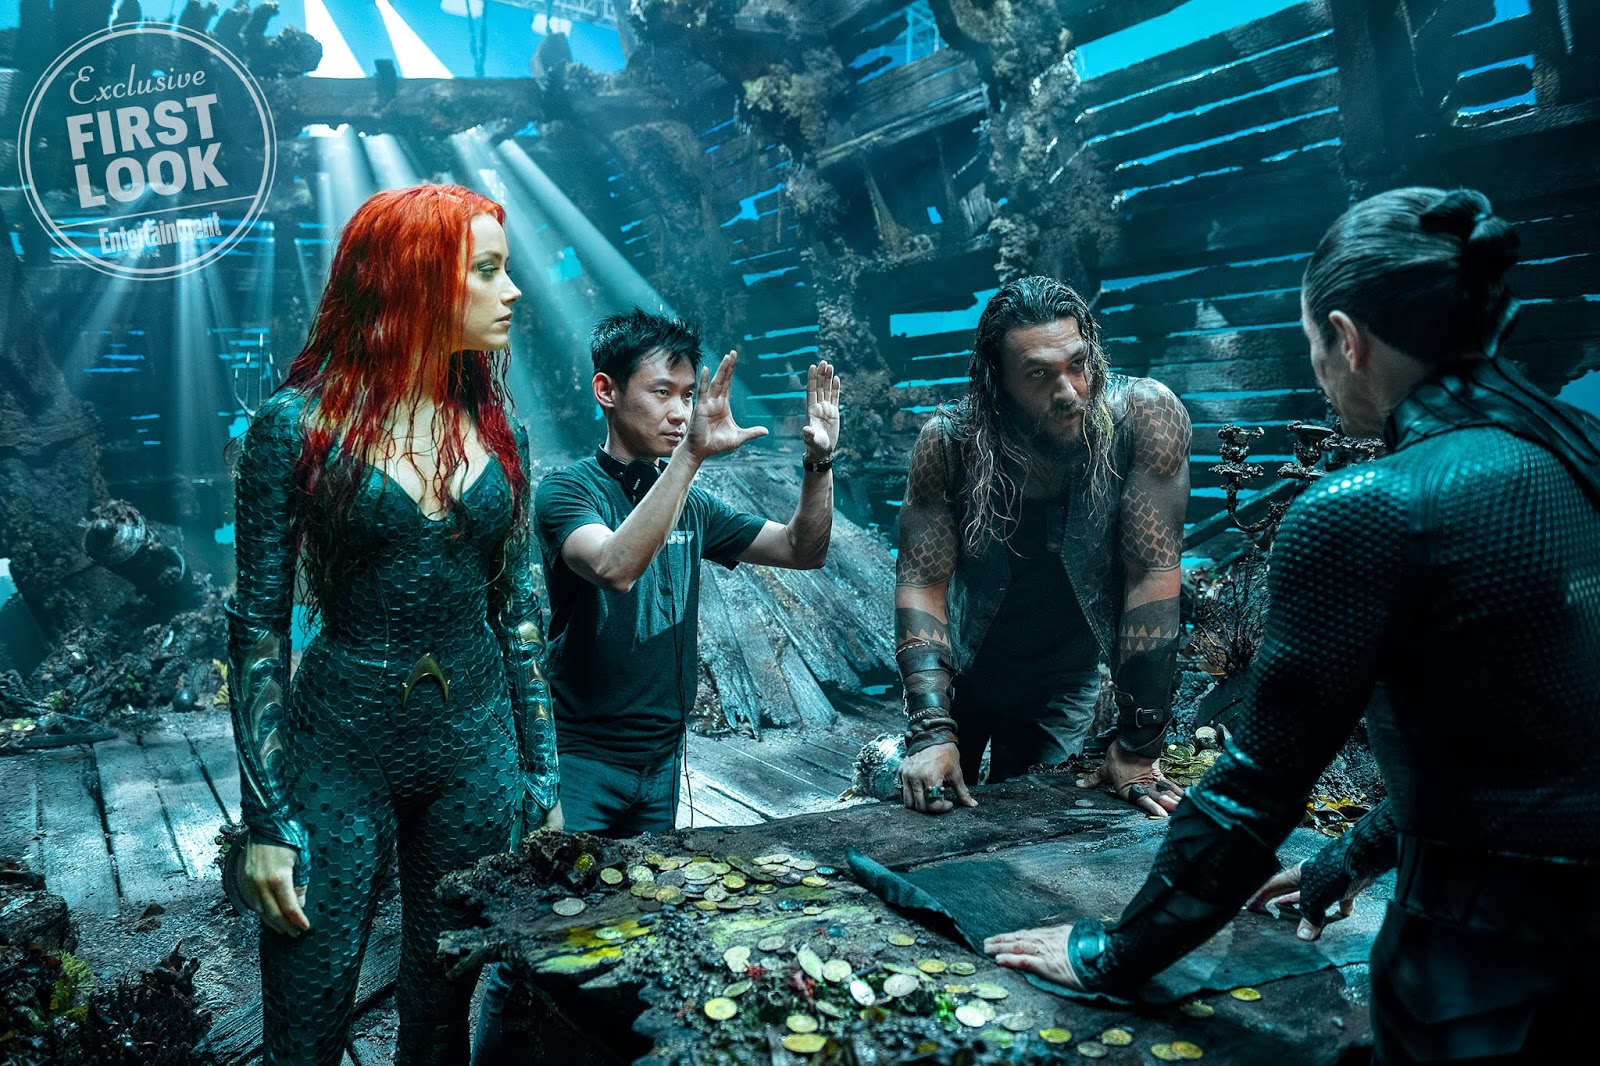 AQUAMAN on Entertainment Weekly: Covers & Image Still Reveals!